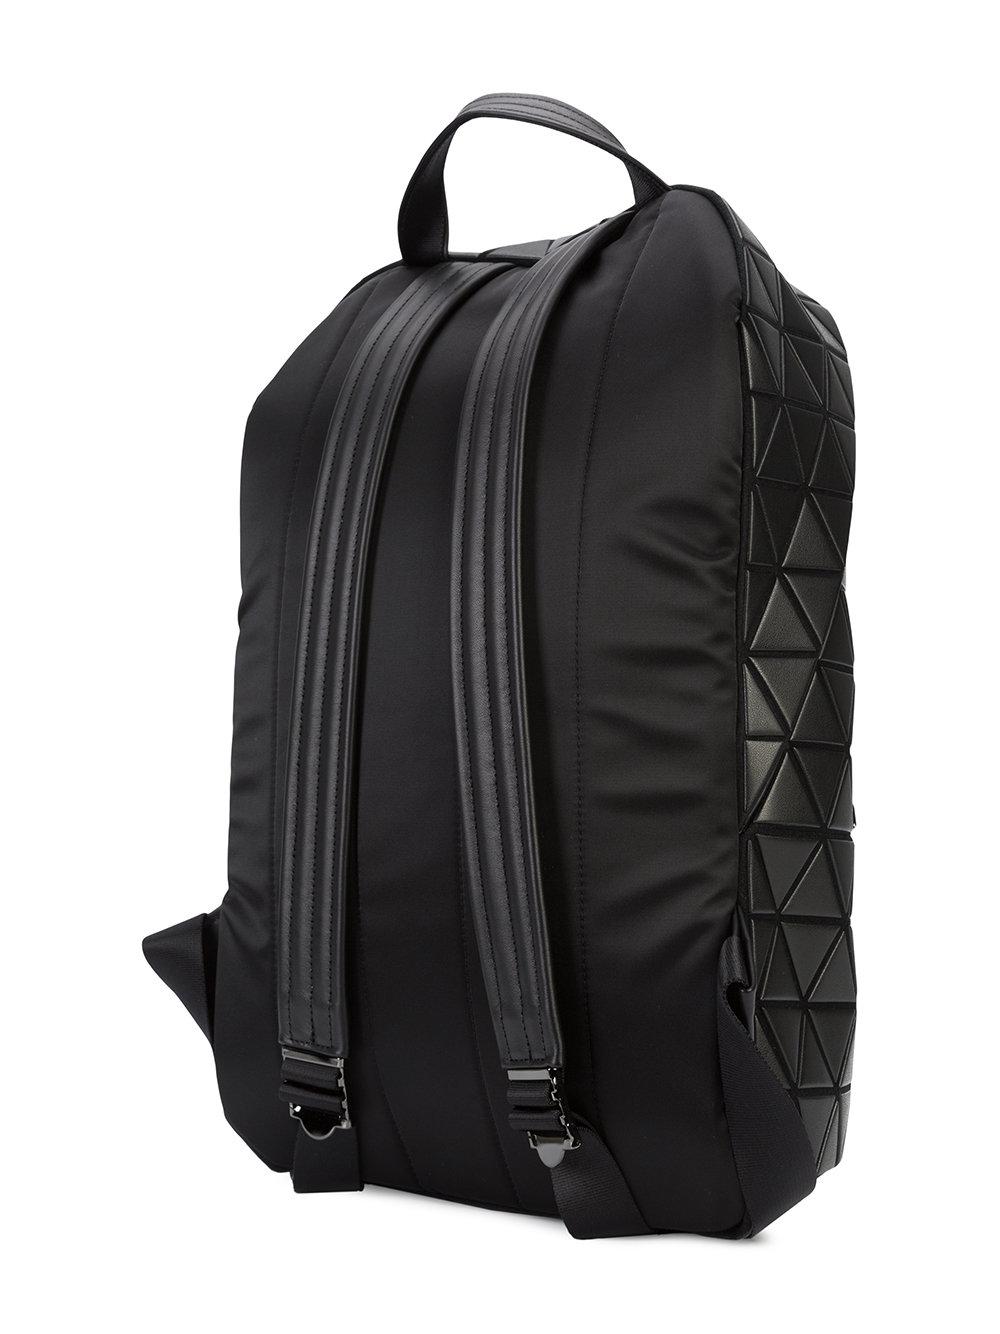 Bao Bao Issey Miyake Synthetic Prism Jet Backpack in Black for Men - Lyst